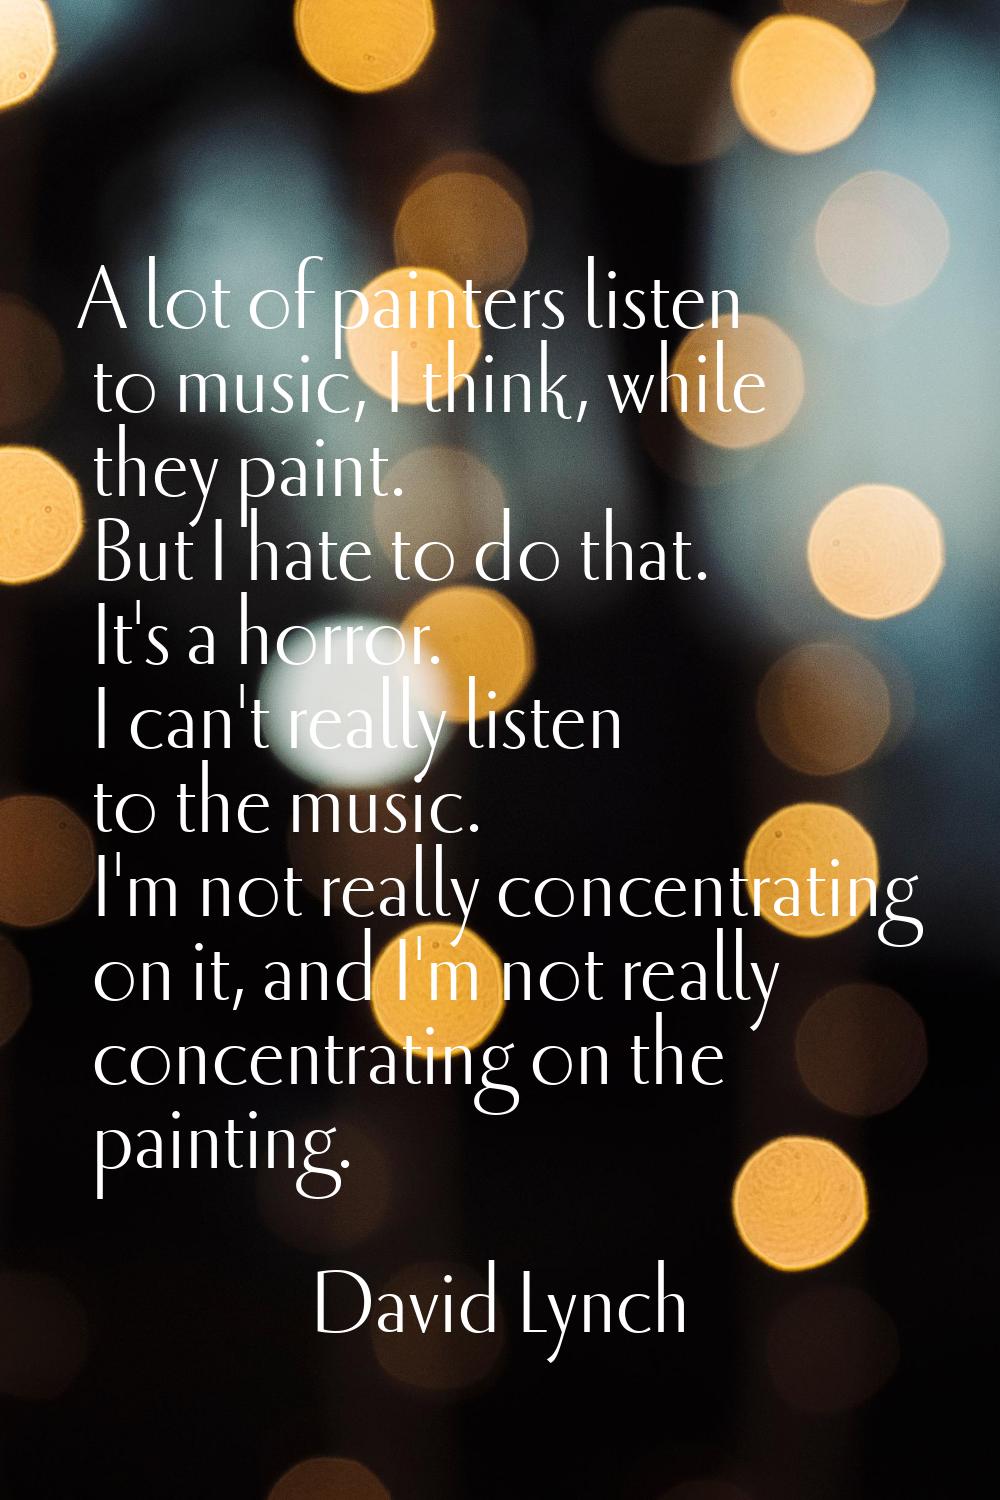 A lot of painters listen to music, I think, while they paint. But I hate to do that. It's a horror.